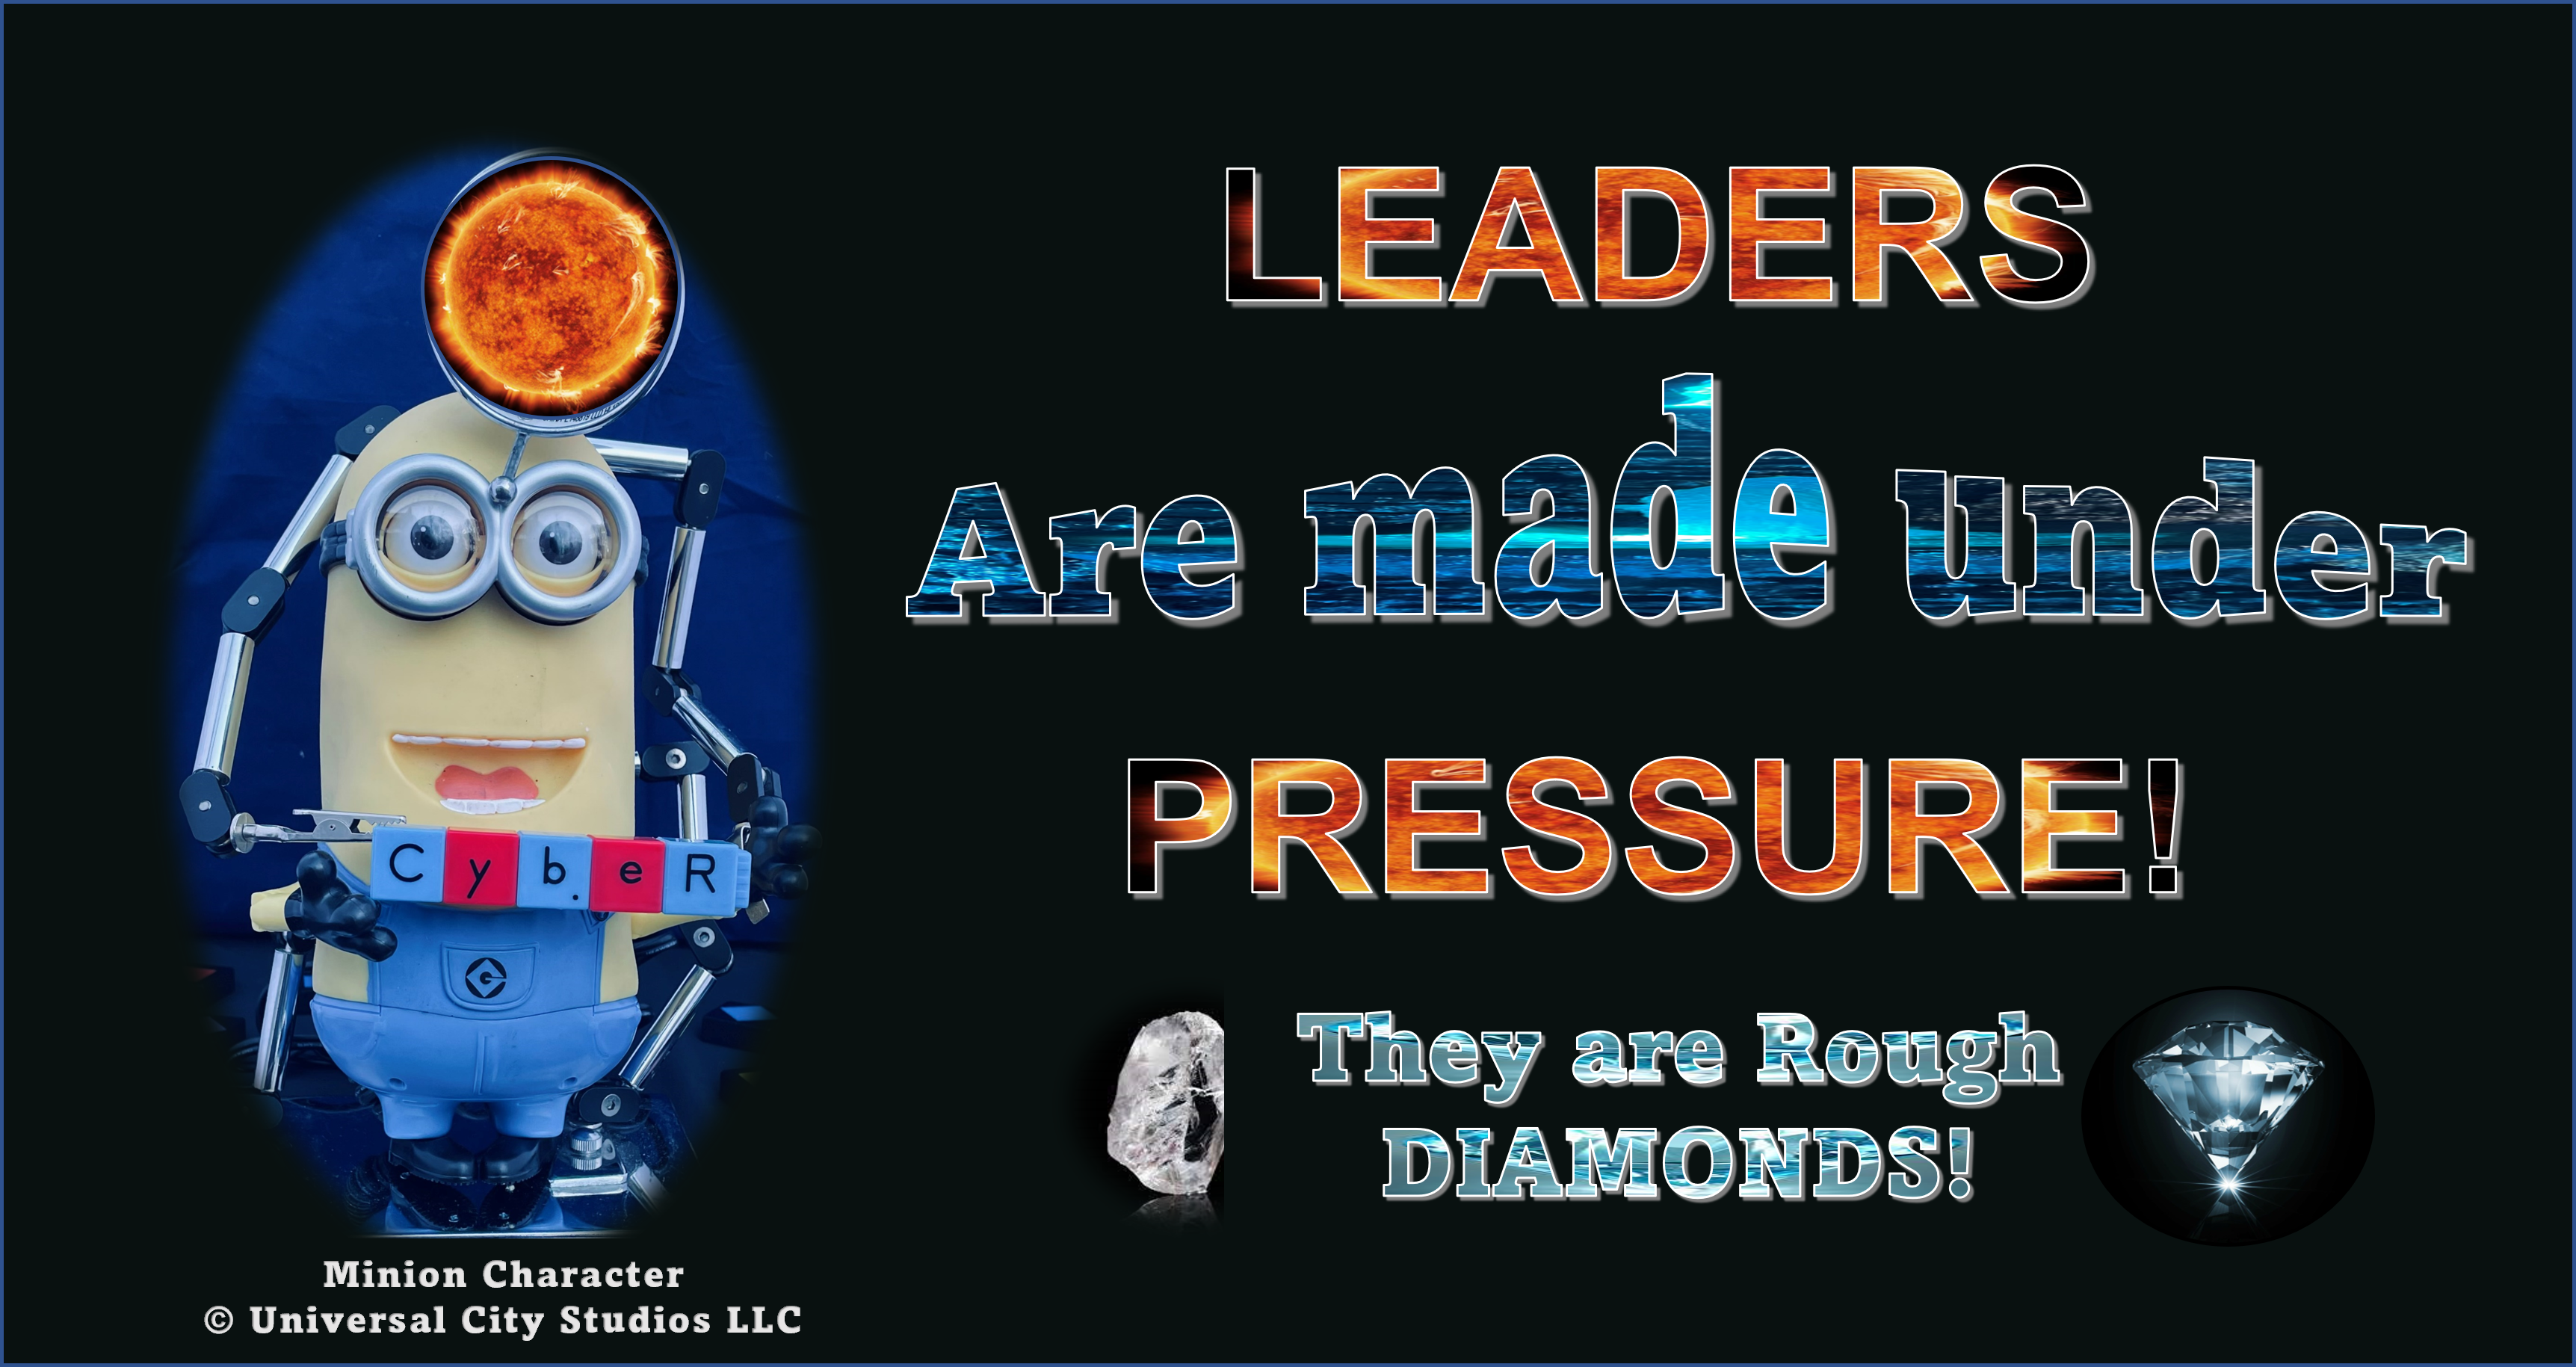 Leaders are made under pressure.